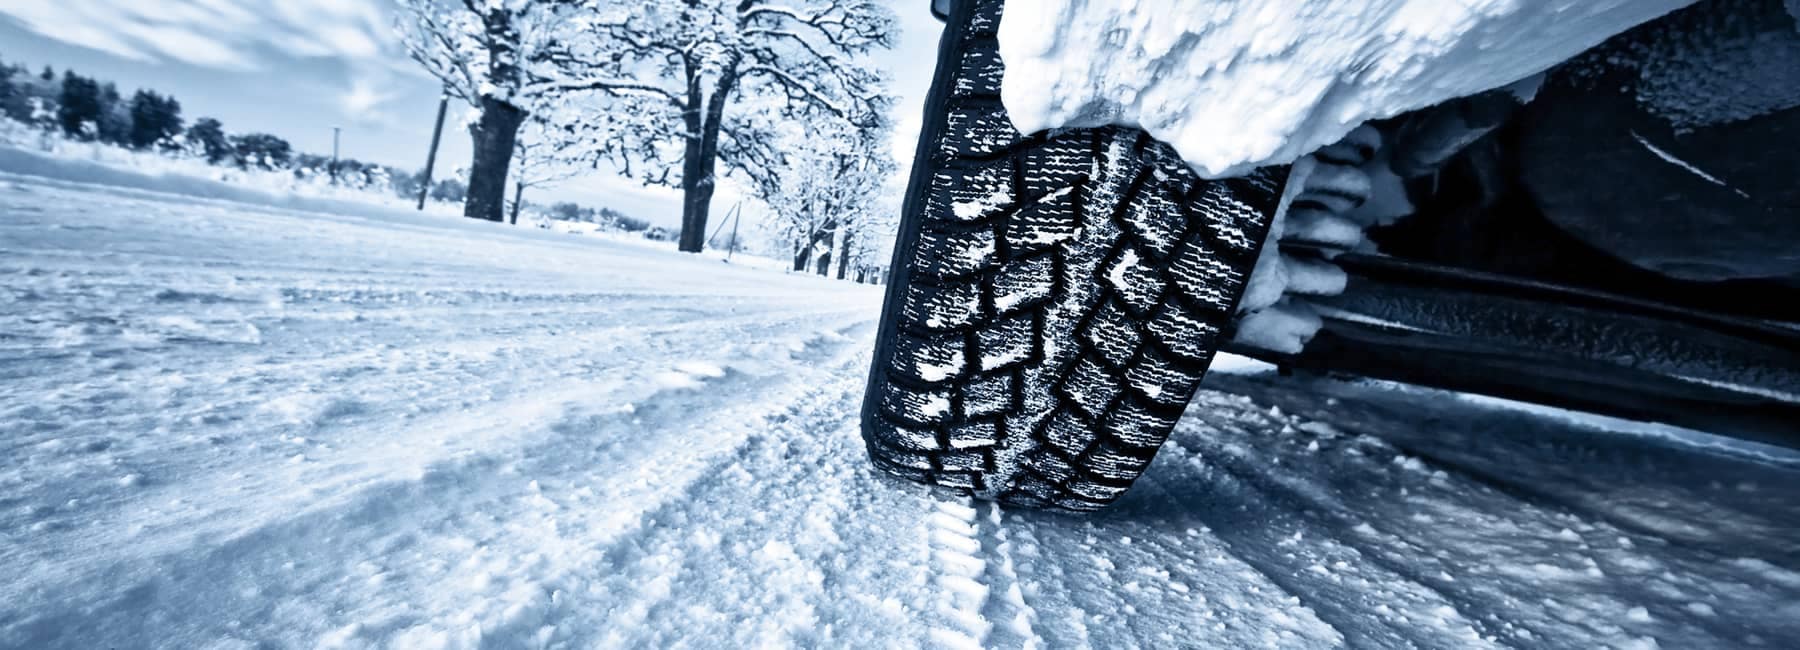 tires shot in winter with snow